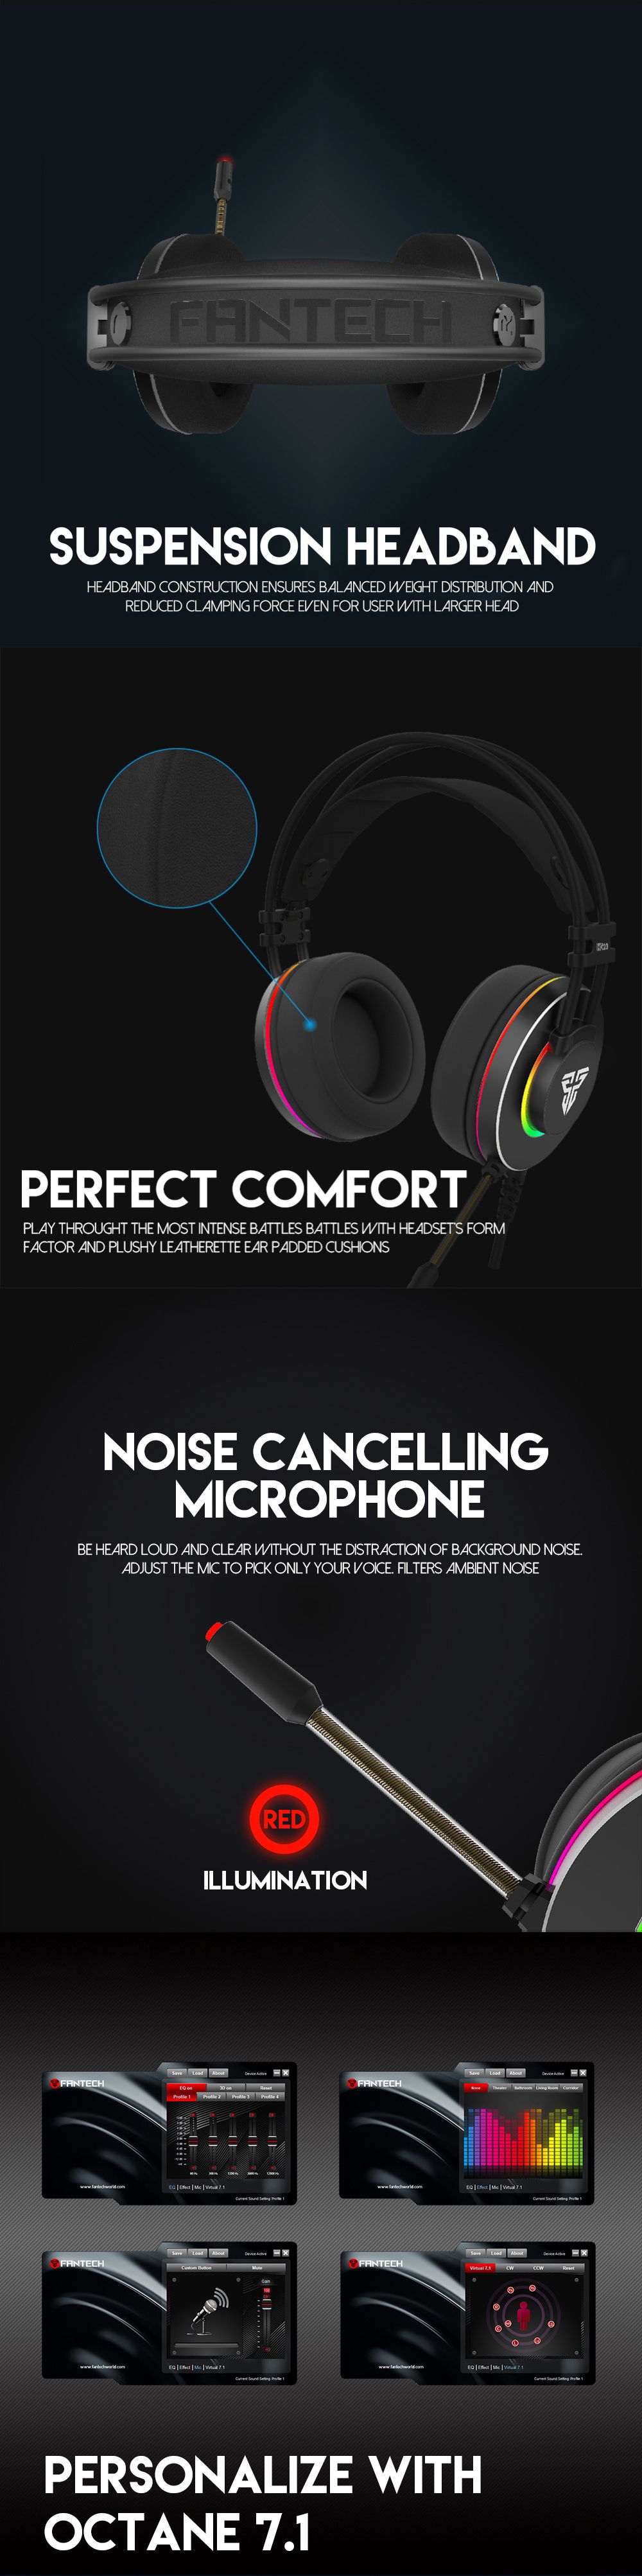 FANTECH-HG23-Game-Headphone-71-Surround-Sound-RGB-USB-Wired-Bass-Gaming-Headset-with-Mic-for-Compute-1690586